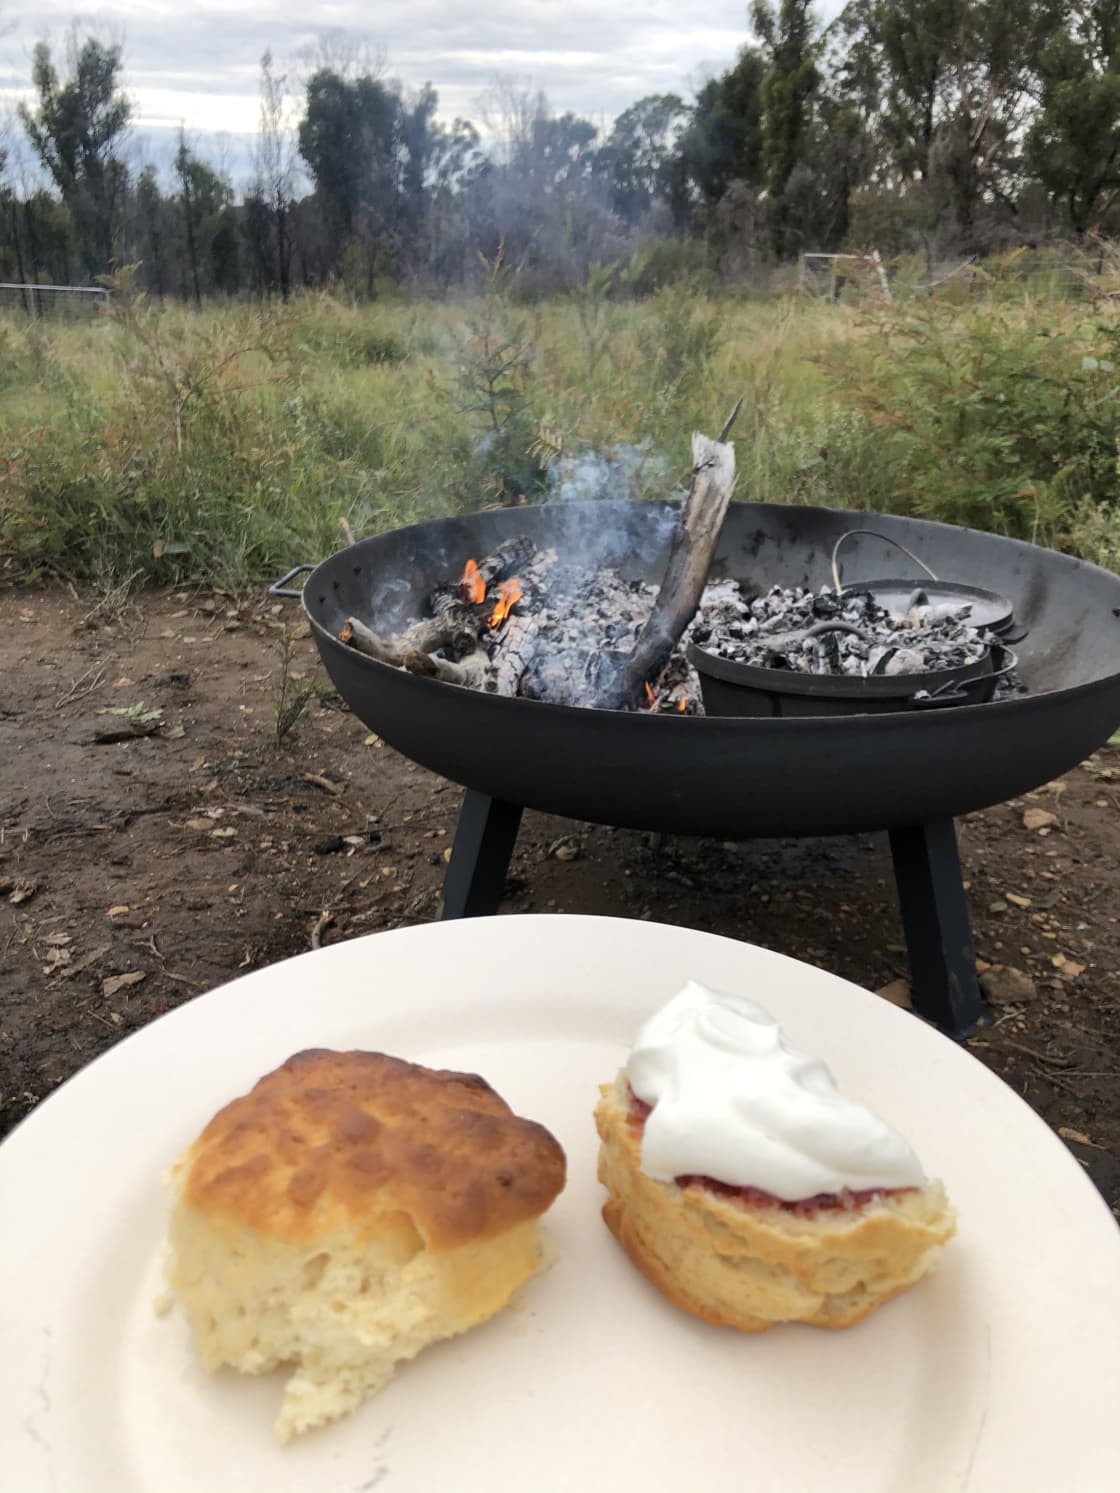 Scones in the camp oven